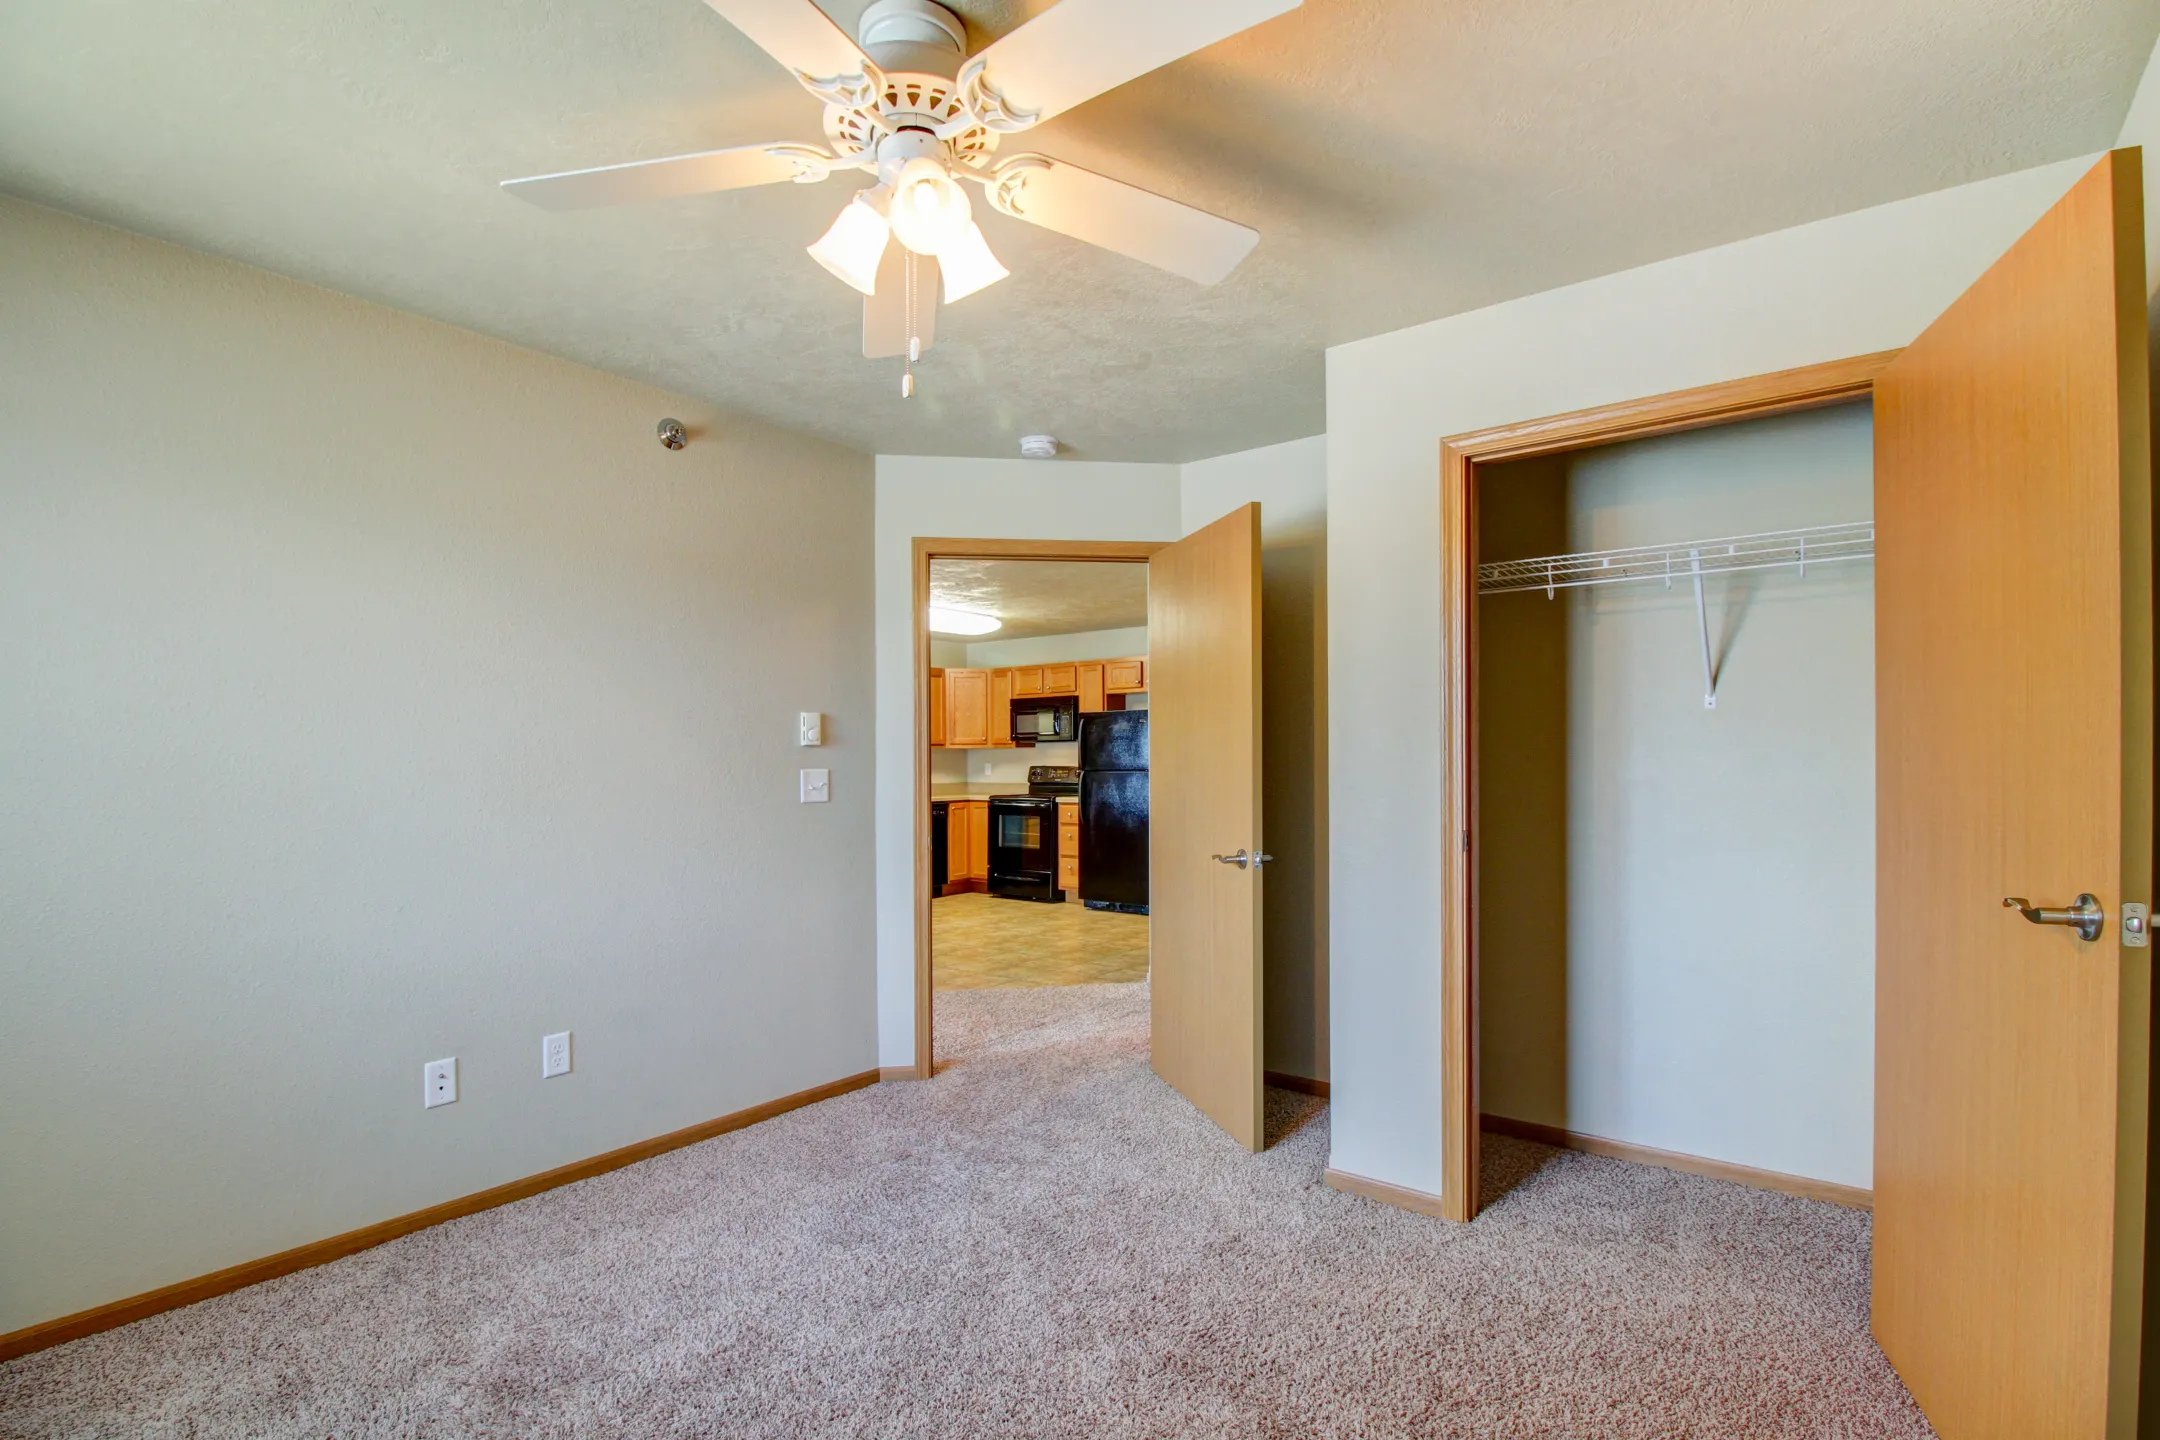 Bedroom - Northdale Apartments - Minot, ND